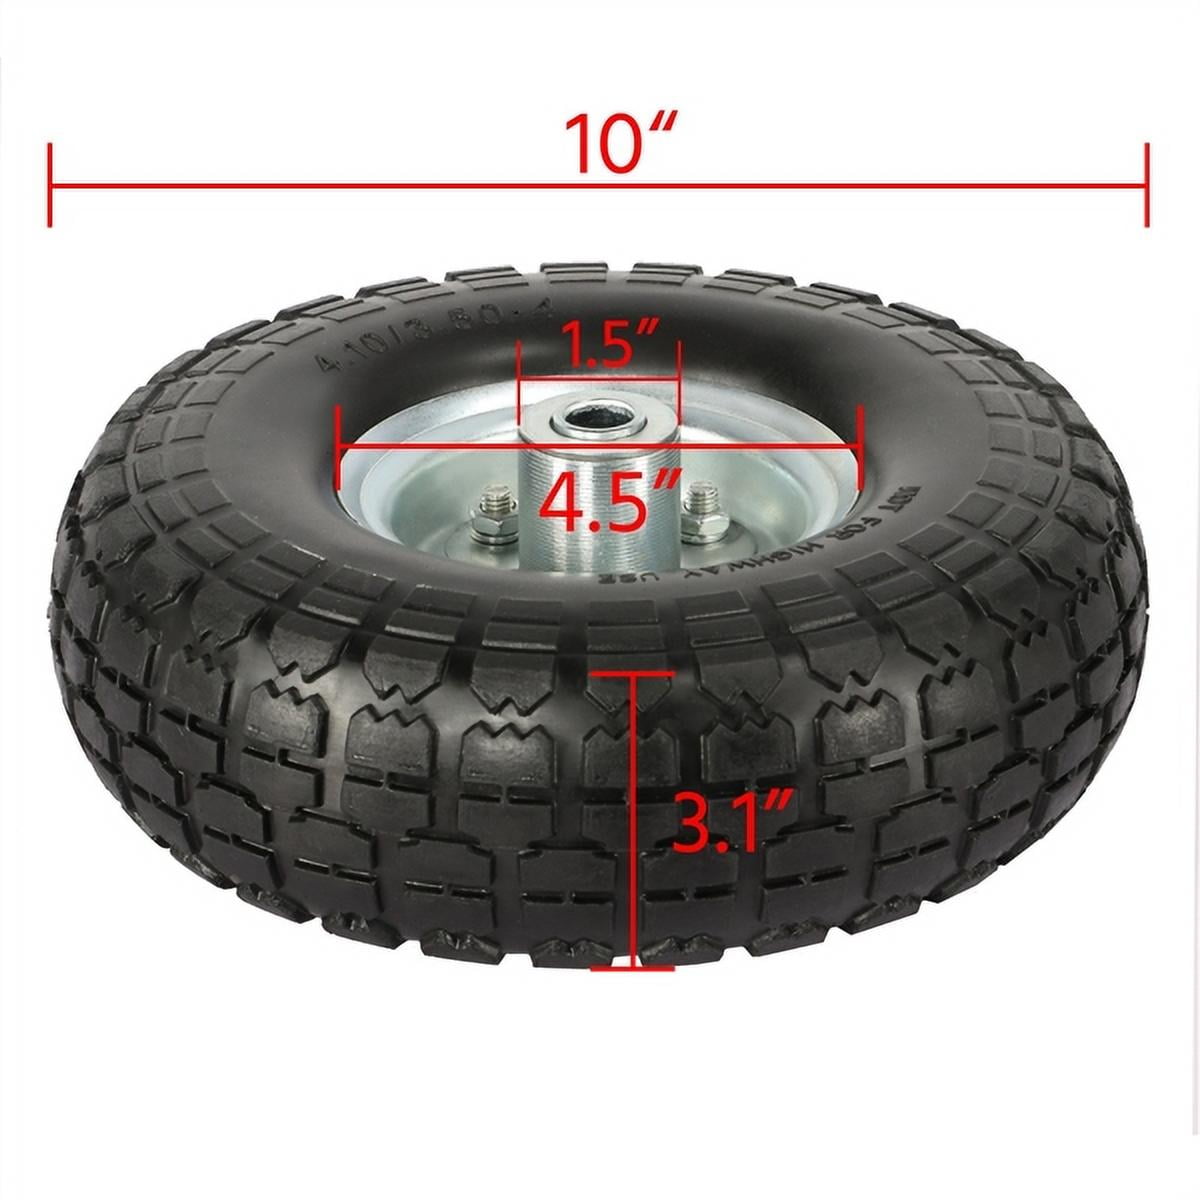 Solid Rubber Replacement 10 Inch Wheels Garden Wagons Carts Trolley Tires 4 Pack 